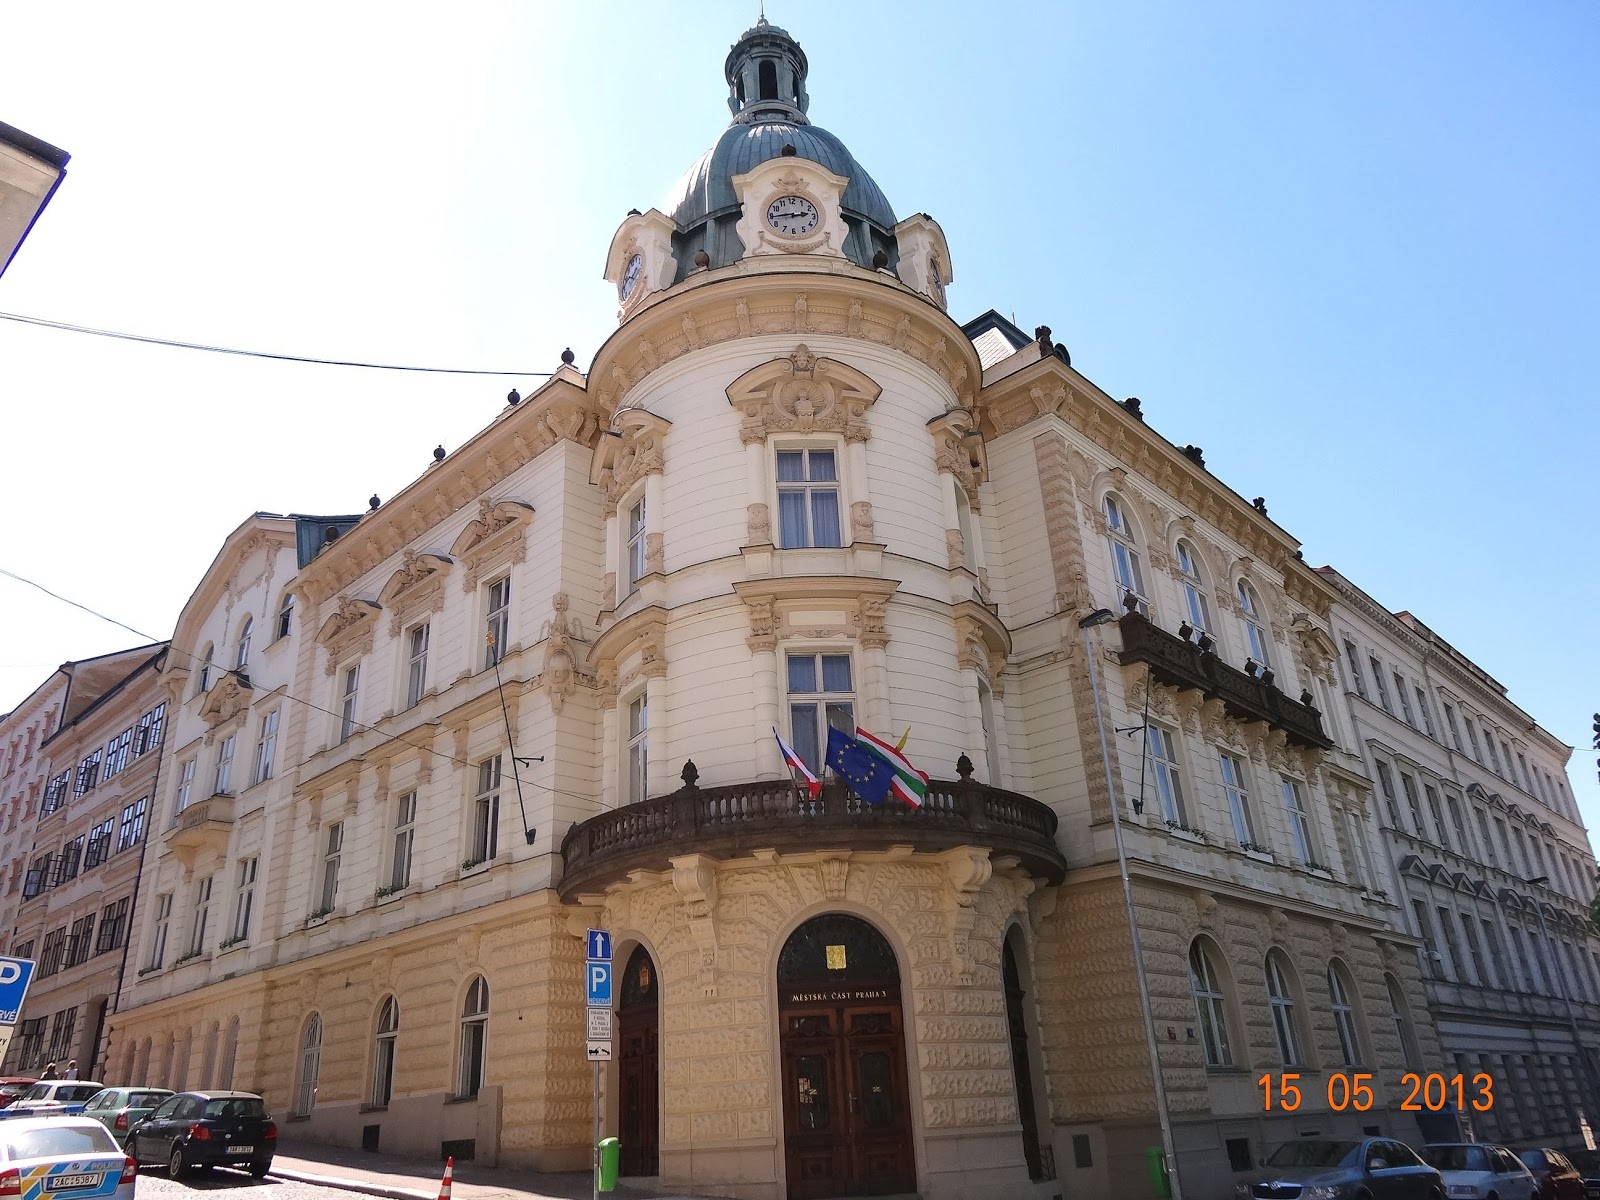 Neo-Renaissance city hall of Zizkov was built by architect John Simacek in 1889 - 1890 and inaugurated on the occasion of opening of the Anniversary Exhibition in 1891.